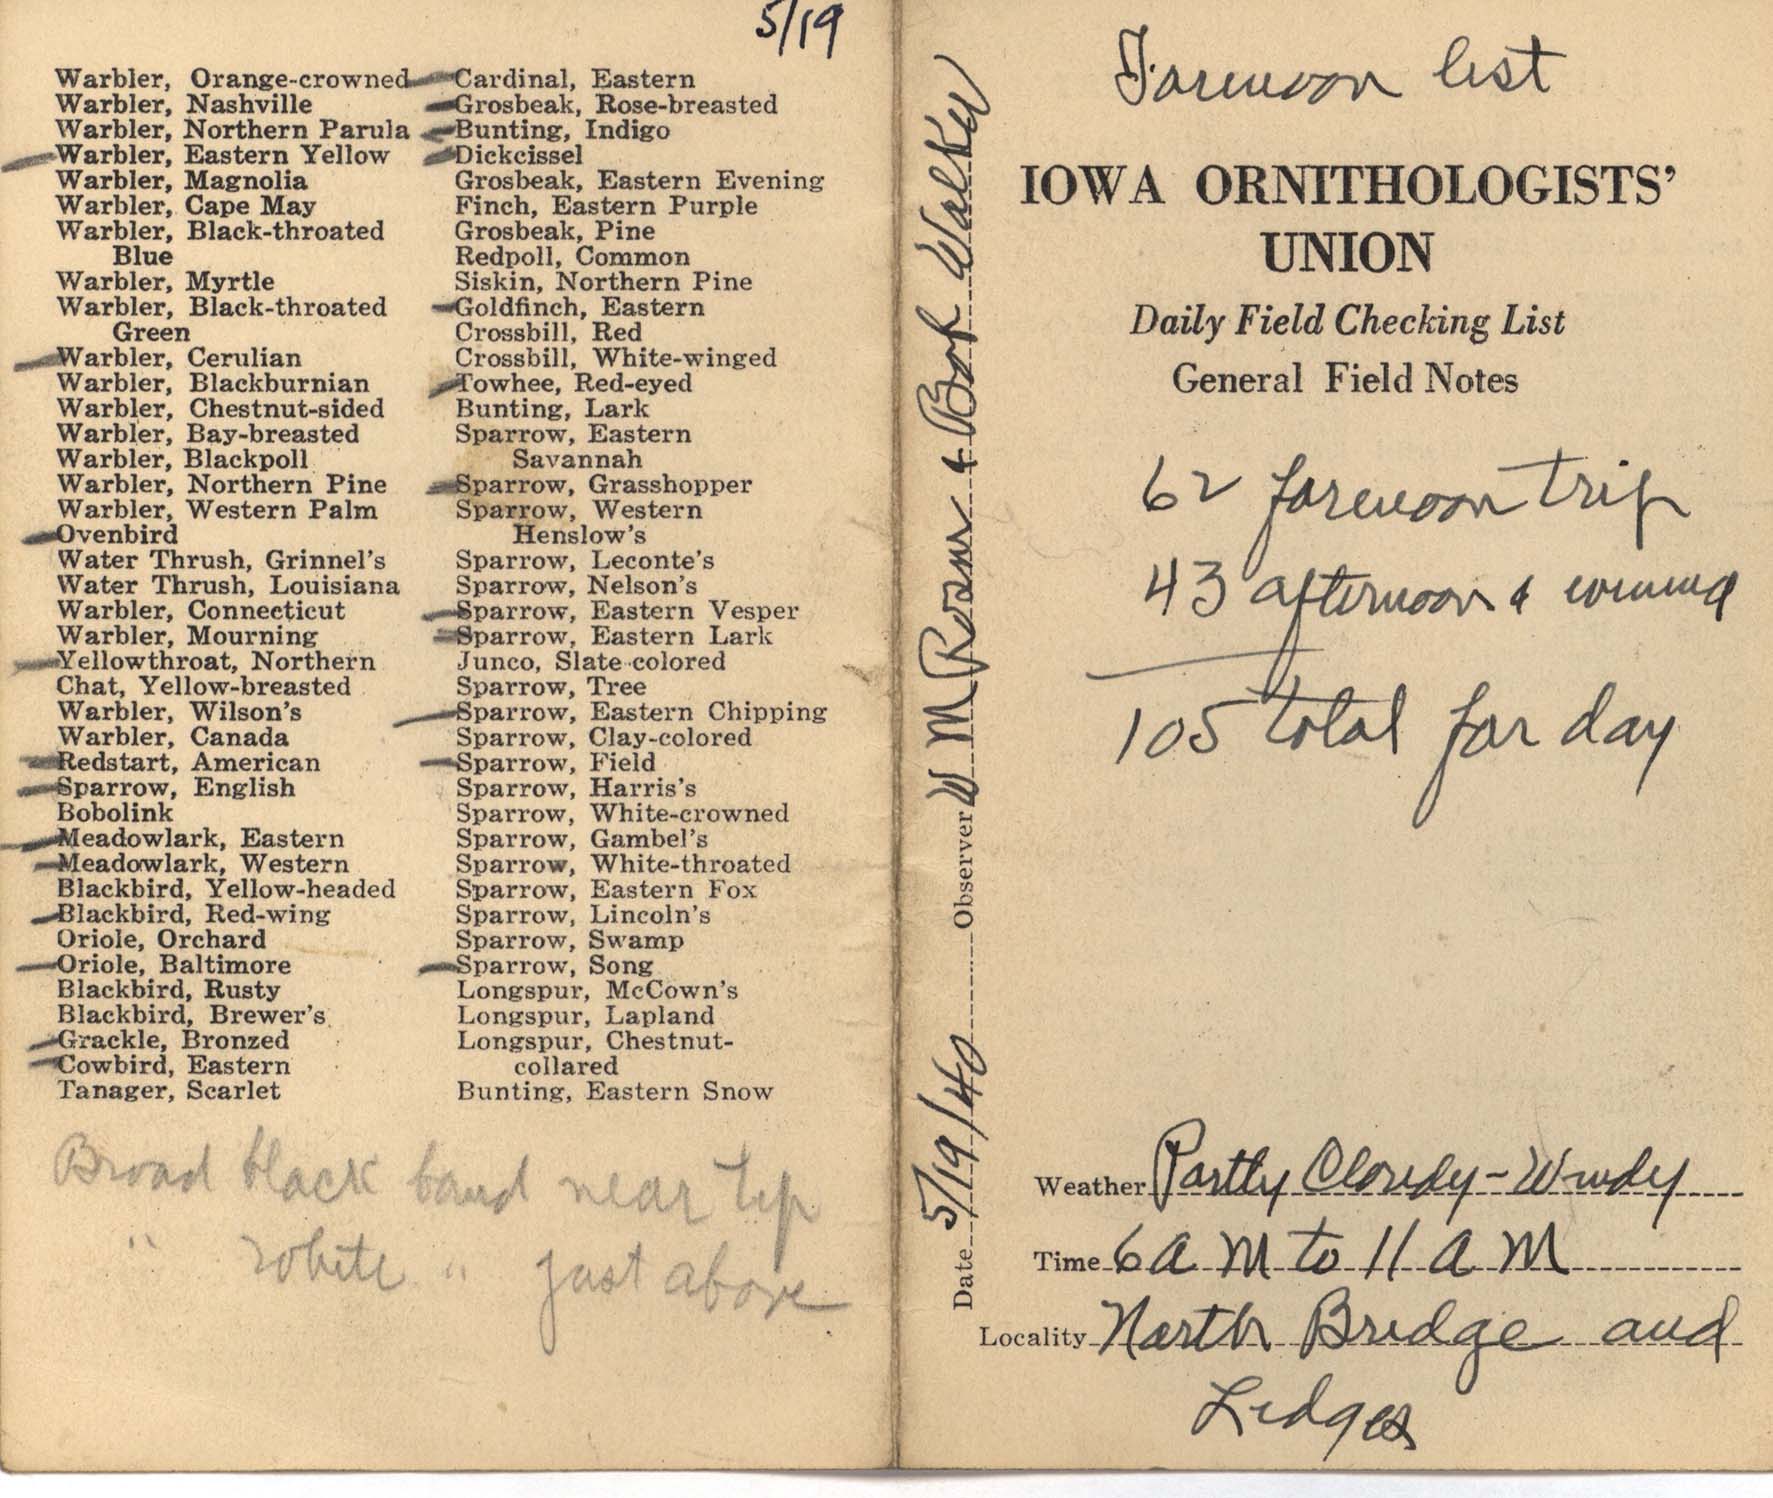 Daily field checking list by Walter Rosene, May 19, 1940